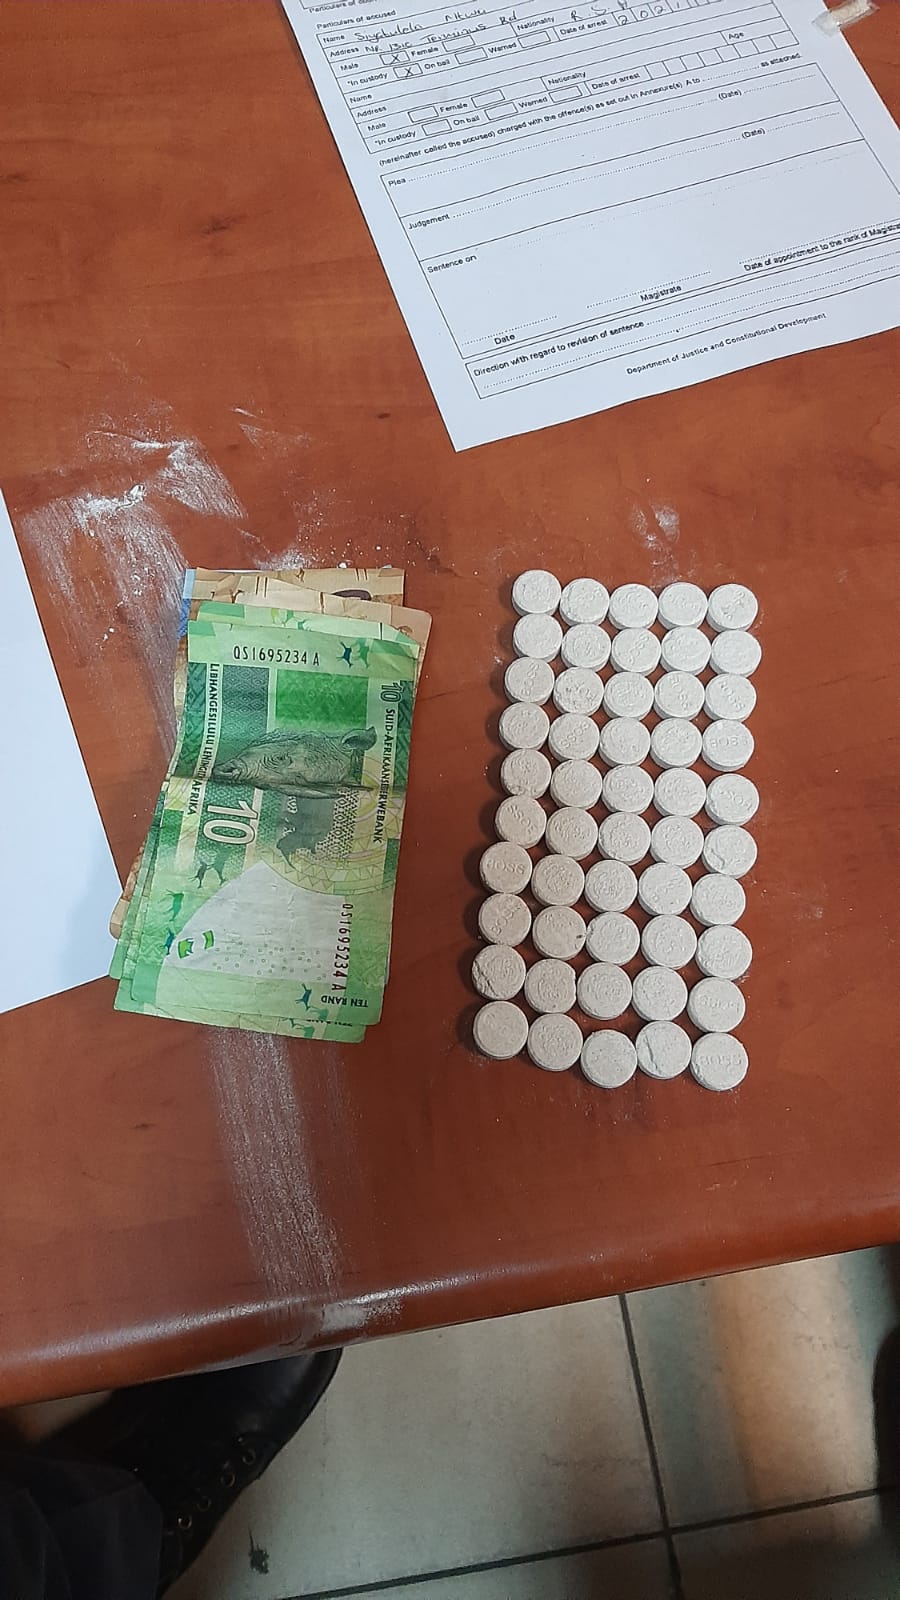 Suspects arrested for possession of drugs